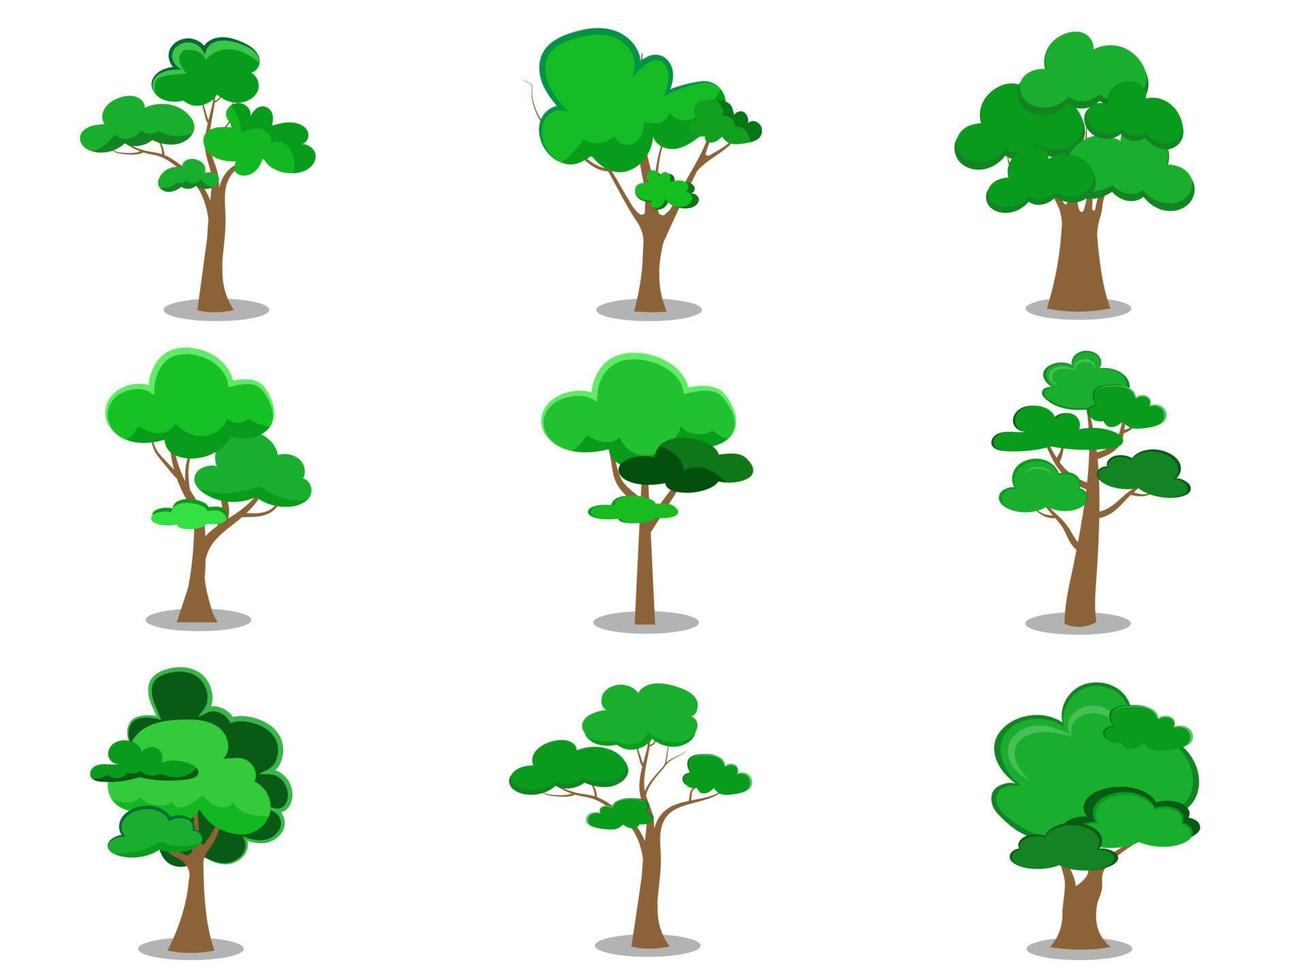 Trees set with green leaves that look beautiful and refreshing. Tree and roots LOGO style. Can be used for your work. vector